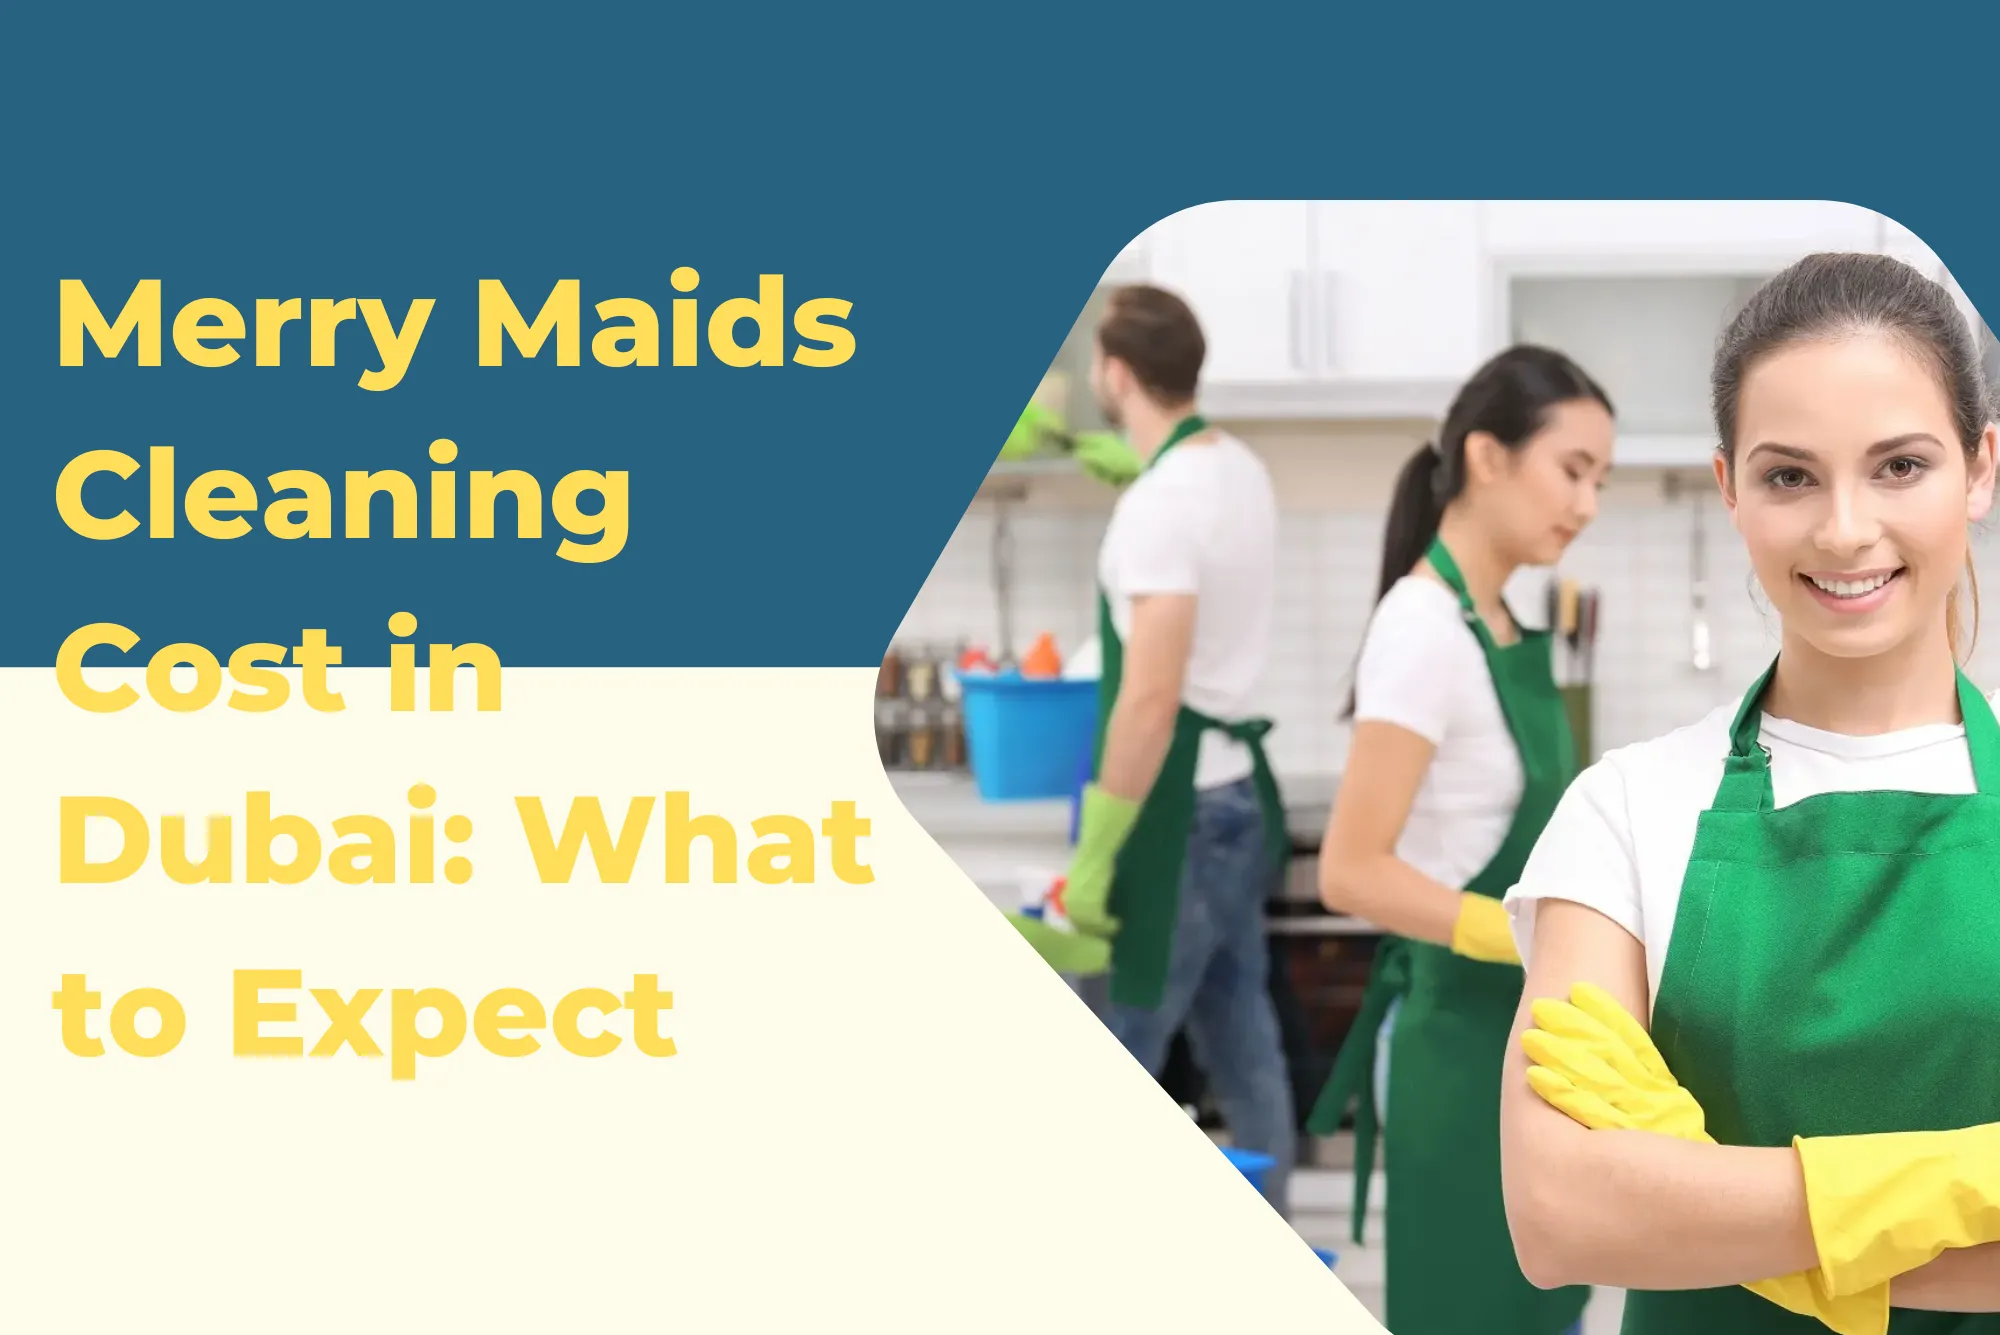 Merry Maids Cleaning Cost in Dubai What to Expect